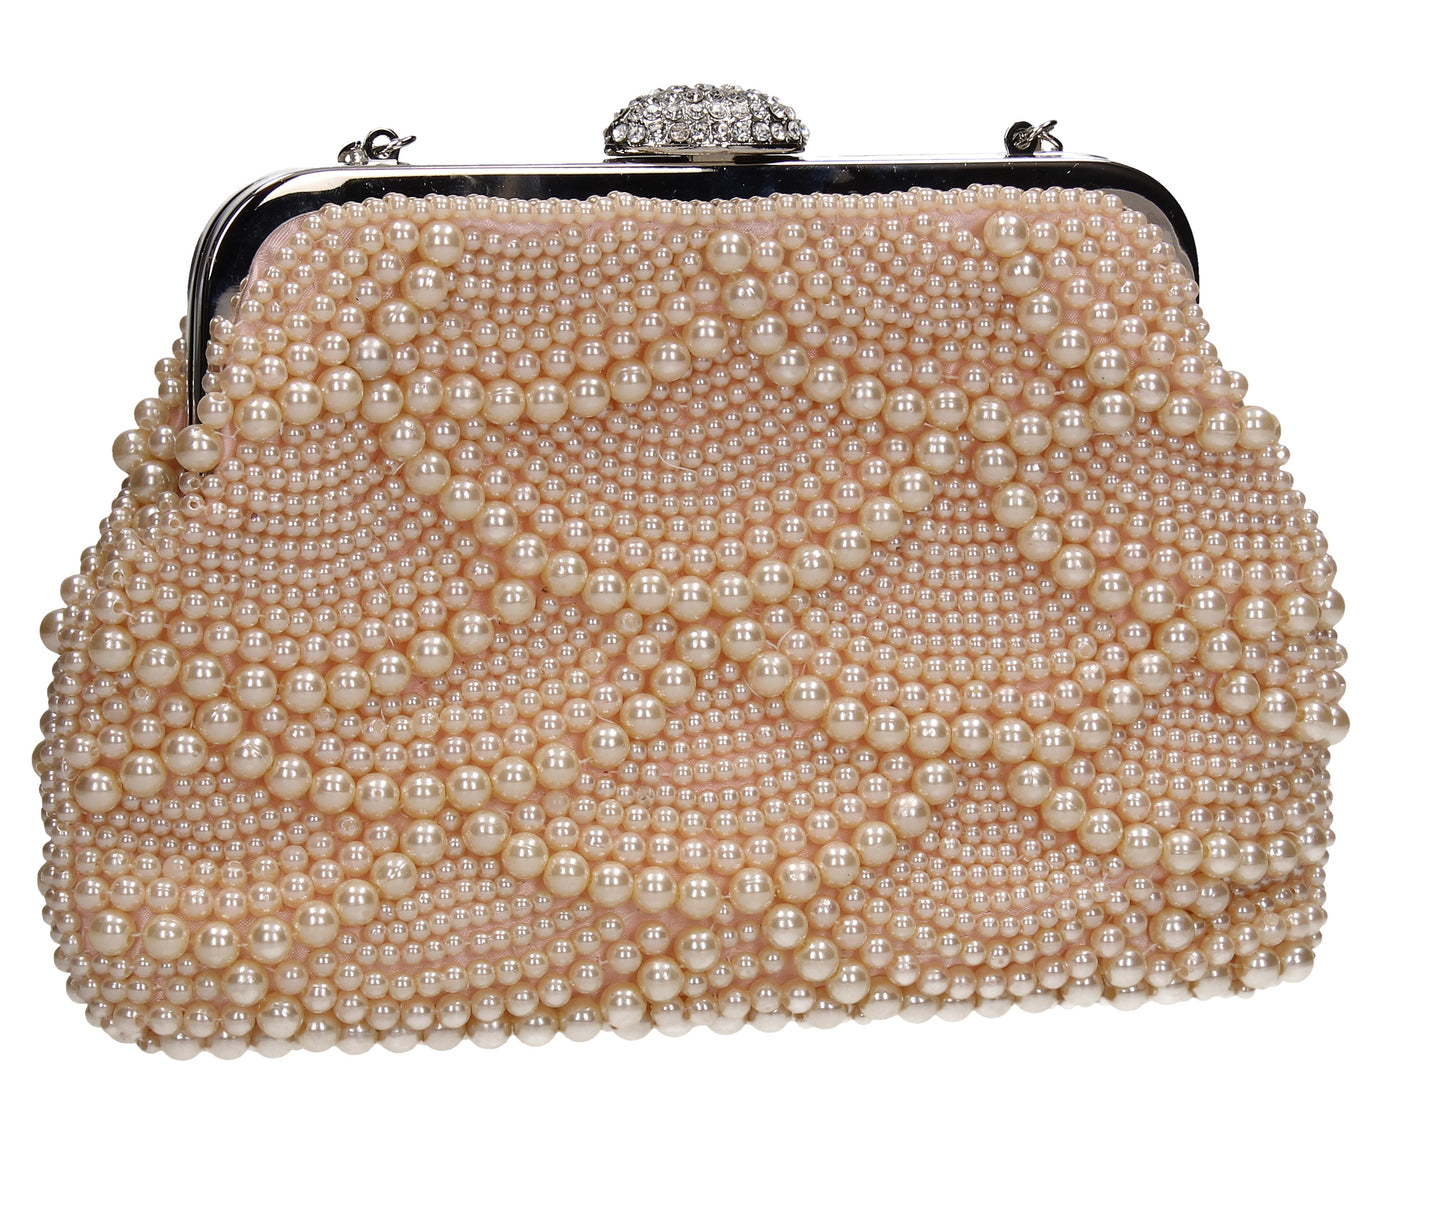 SWANKYSWANS Hailee Faux Pearl Detail Clutch Bag Champagne Cute Cheap Clutch Bag For Weddings School and Work